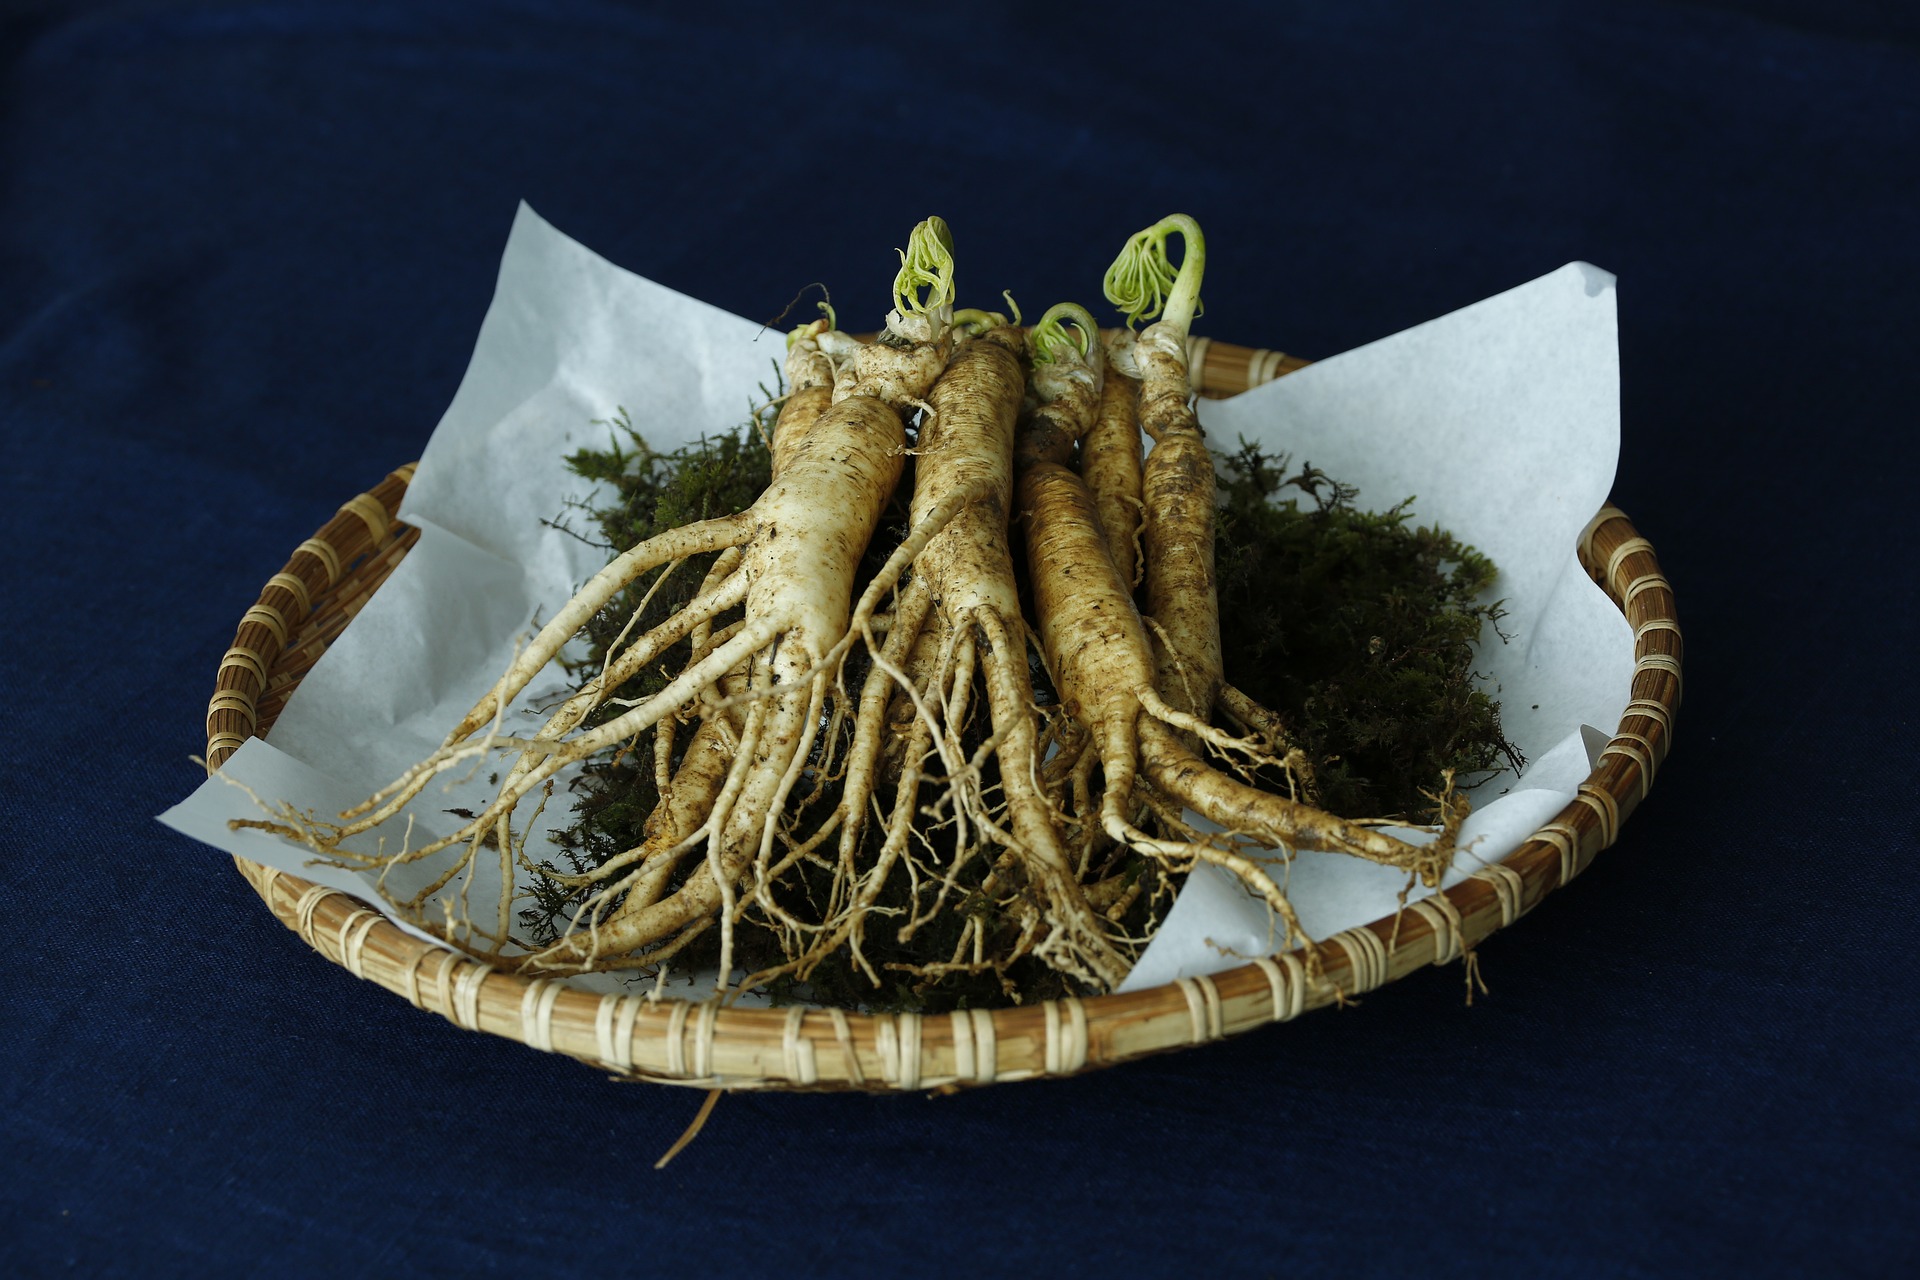 Asian Ginseng Health Benefits And Side Effects